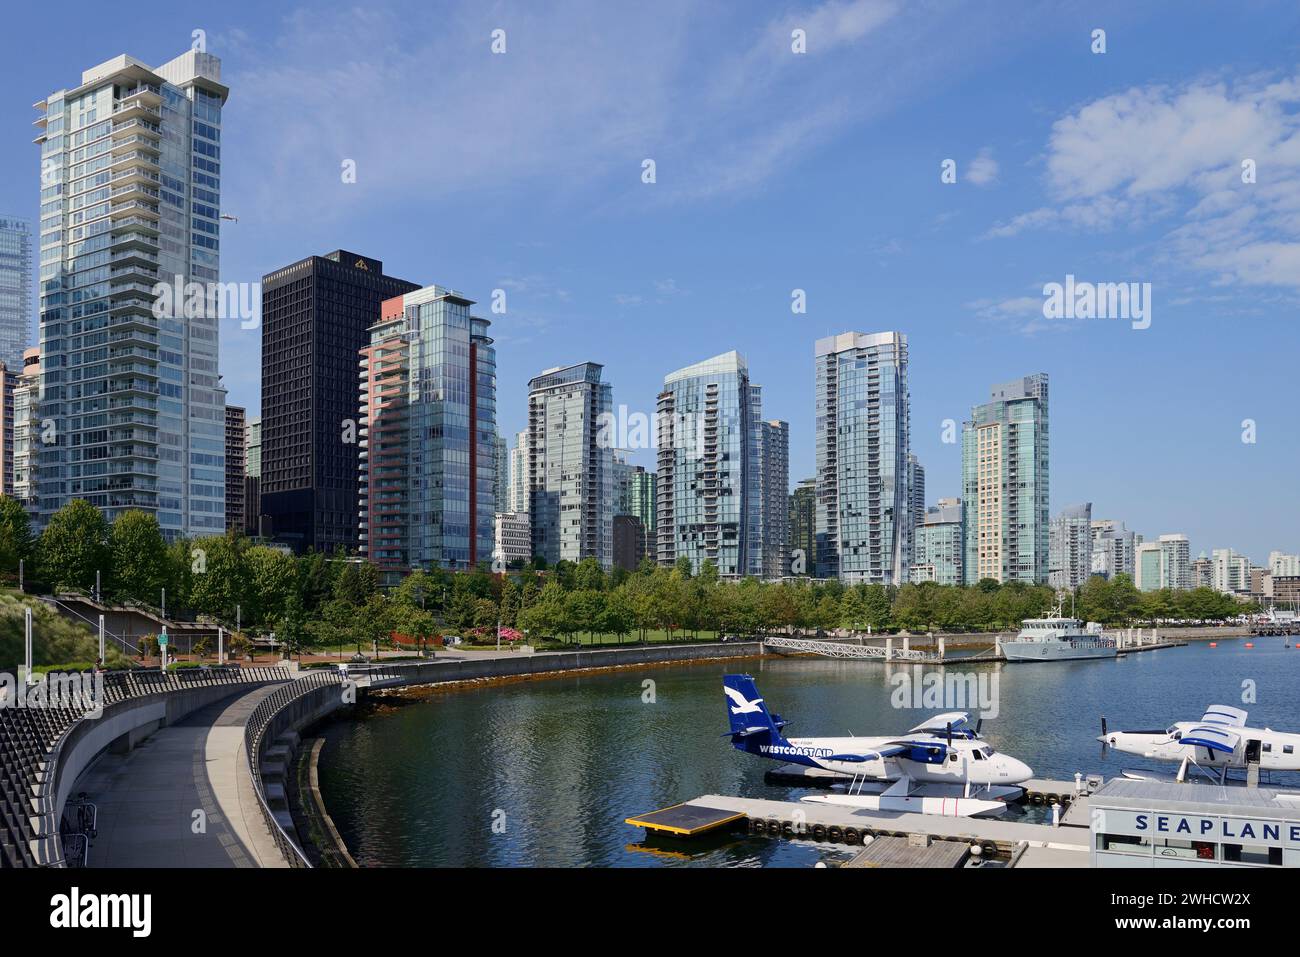 Seaplane terminal and high-rise buildings, Coal Harbour, Burrard Inlet, Vancouver, British Columbia, Canada Stock Photo